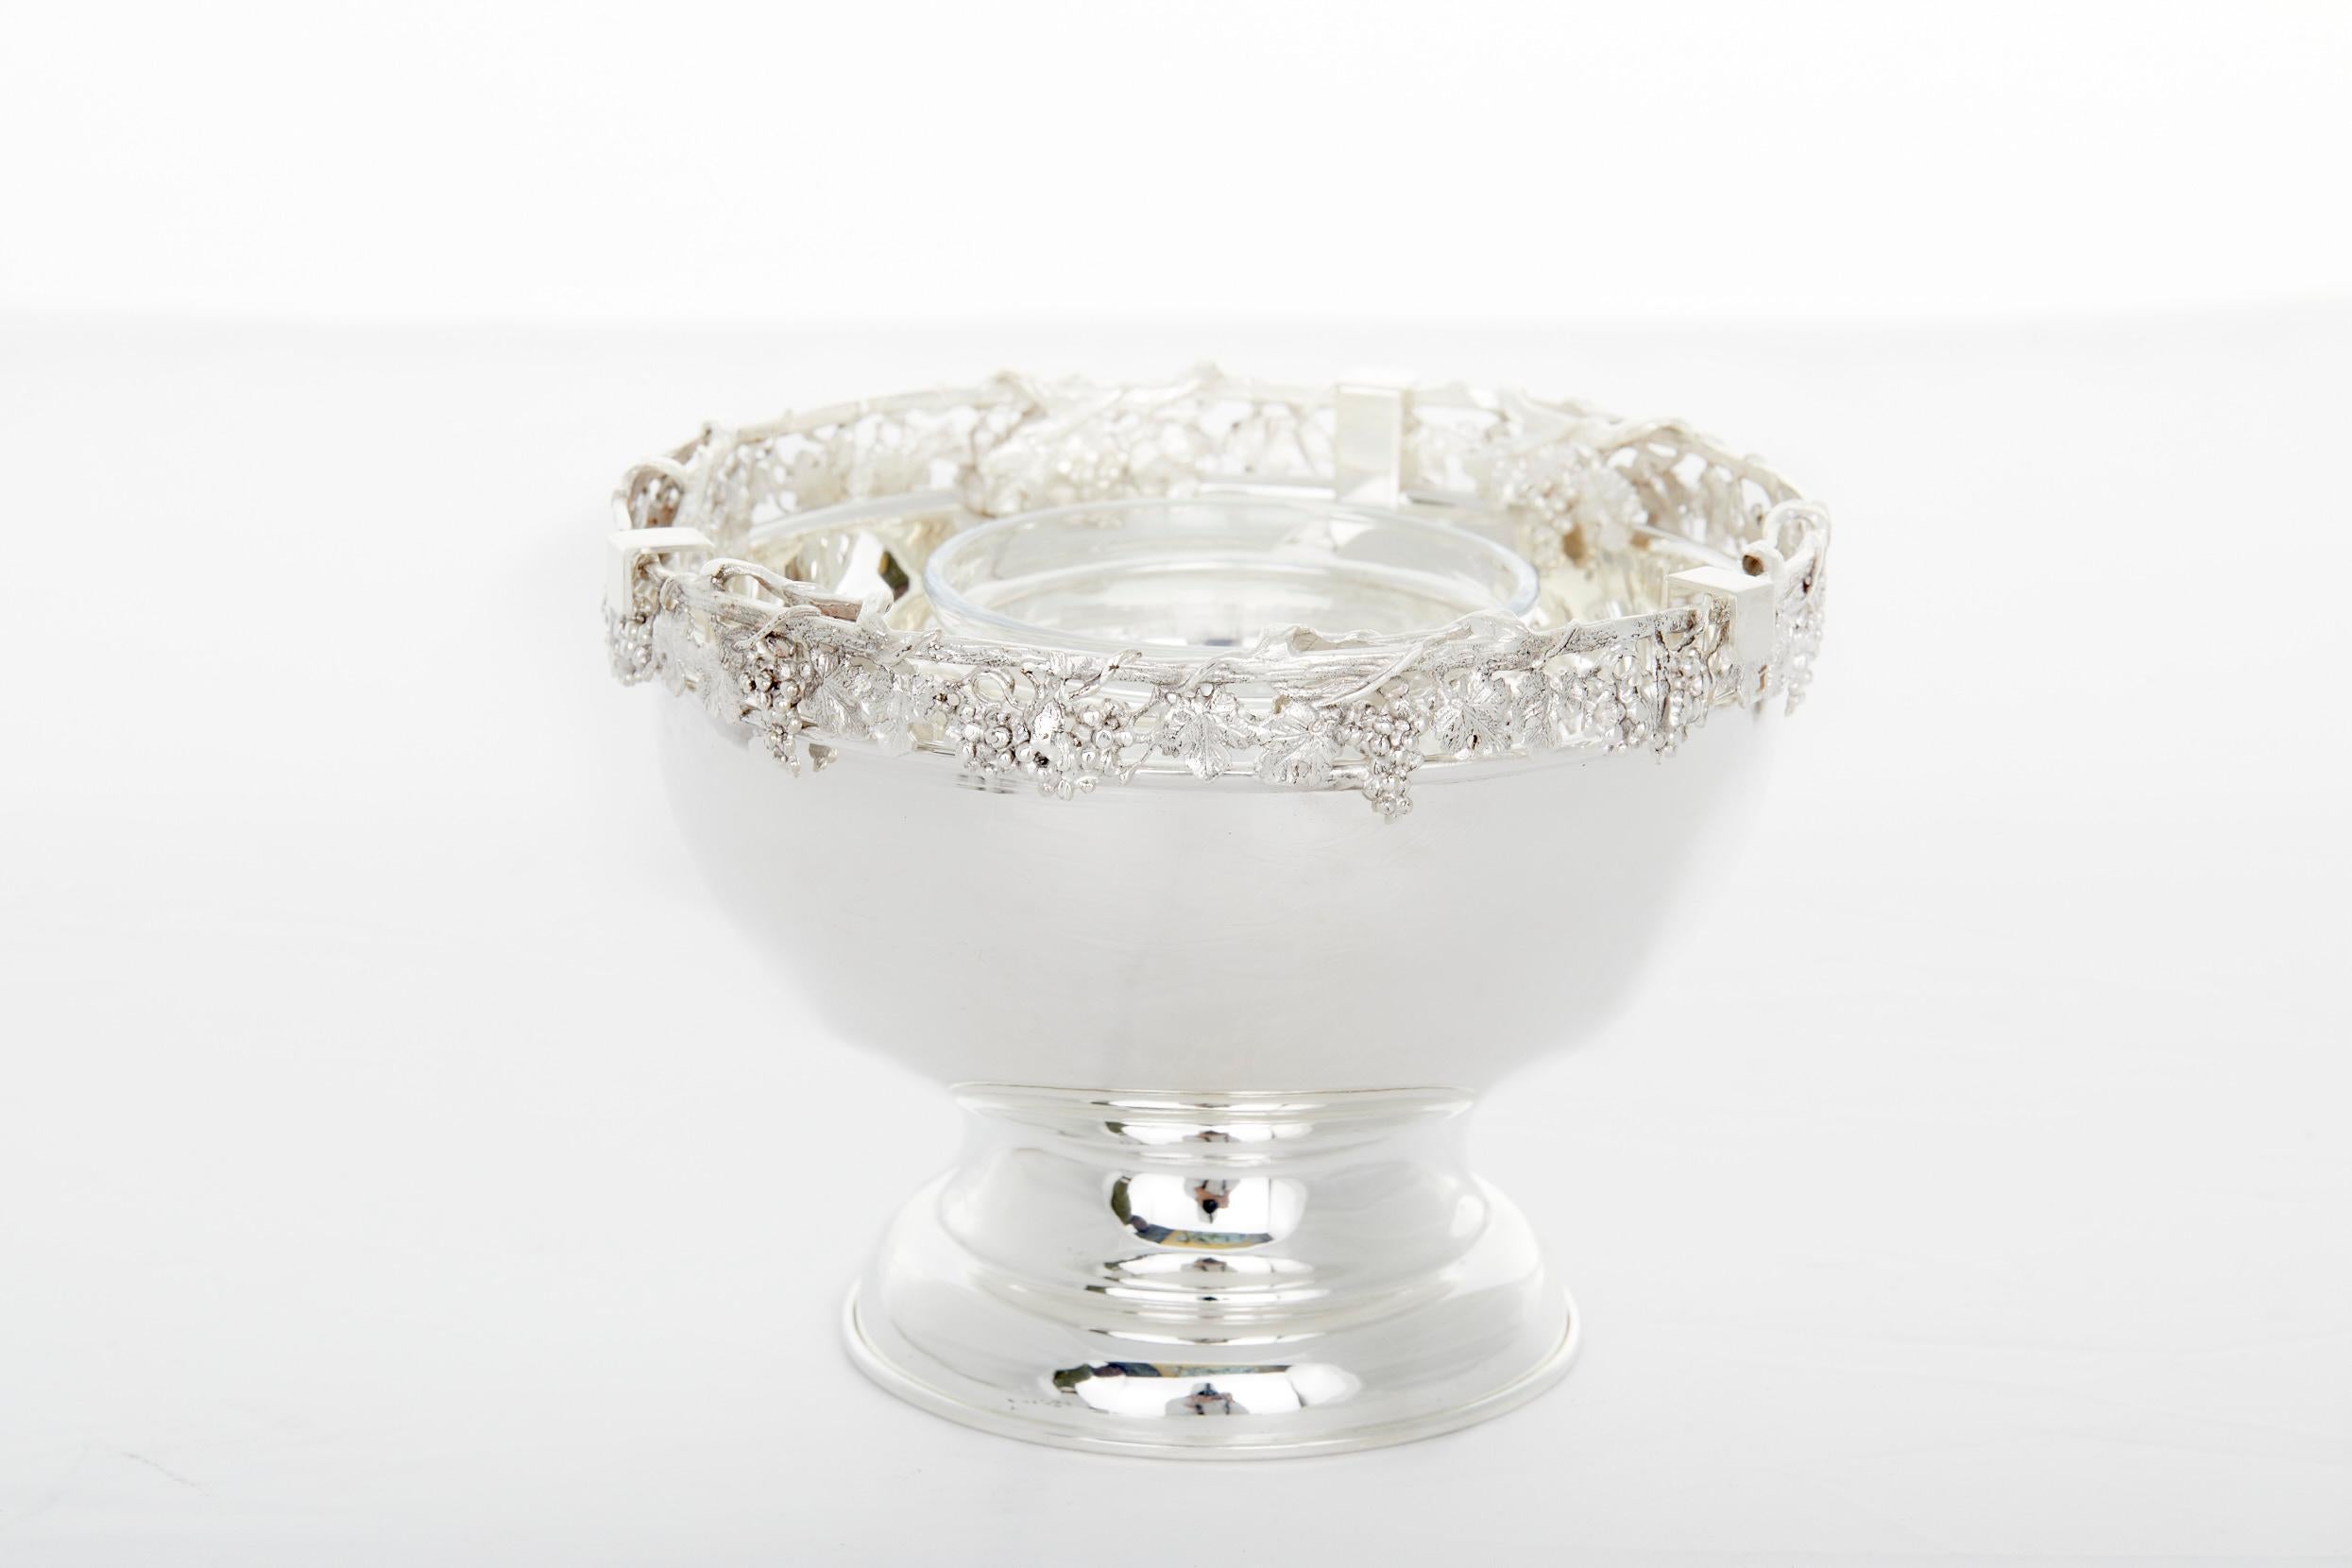 Beautiful hand made sterling silver three piece barware / tableware caviar service. The caviar piece features a round footed base with exterior grape vine top design and glass caviar bowl. The piece is in great condition. Minor wear. Maker's mark